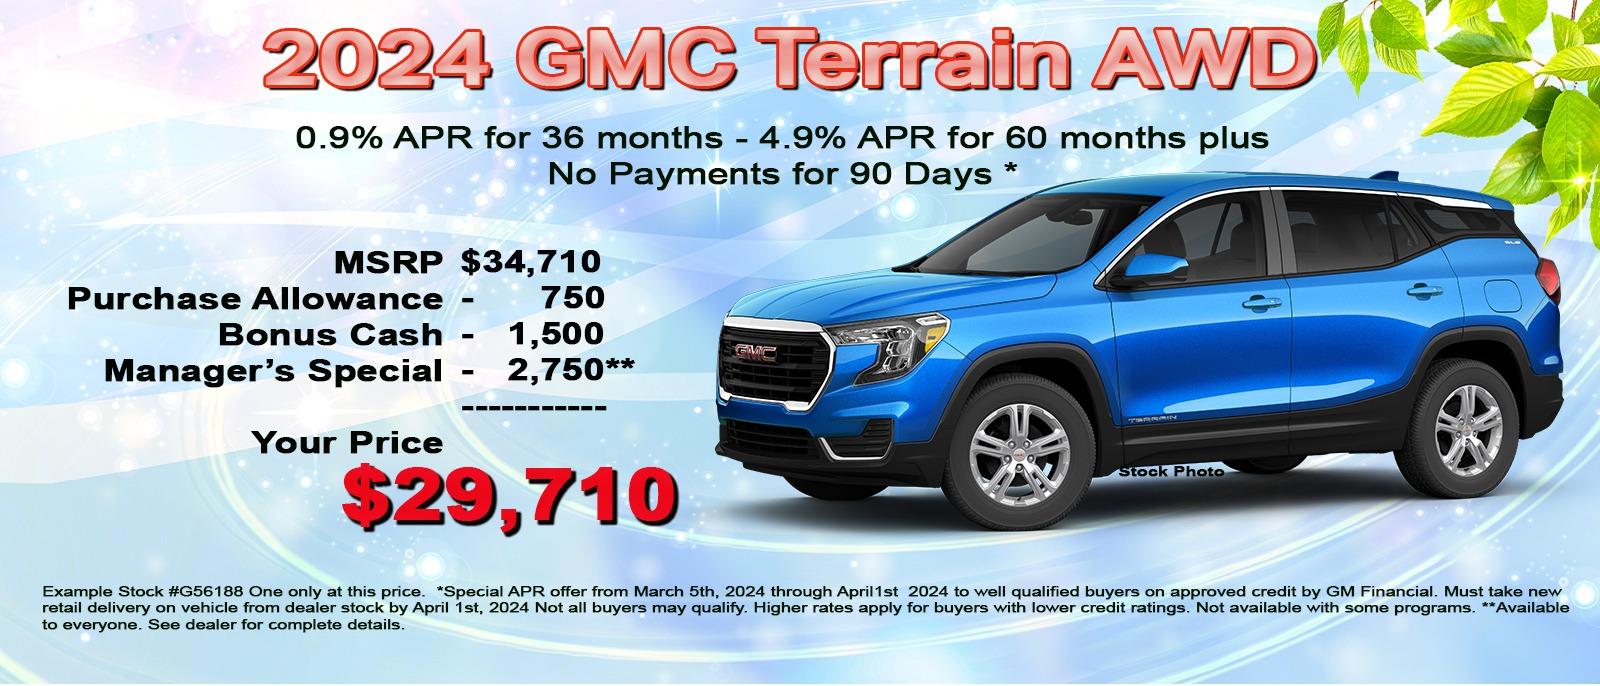 Save $5000 on your new GMC Terrain